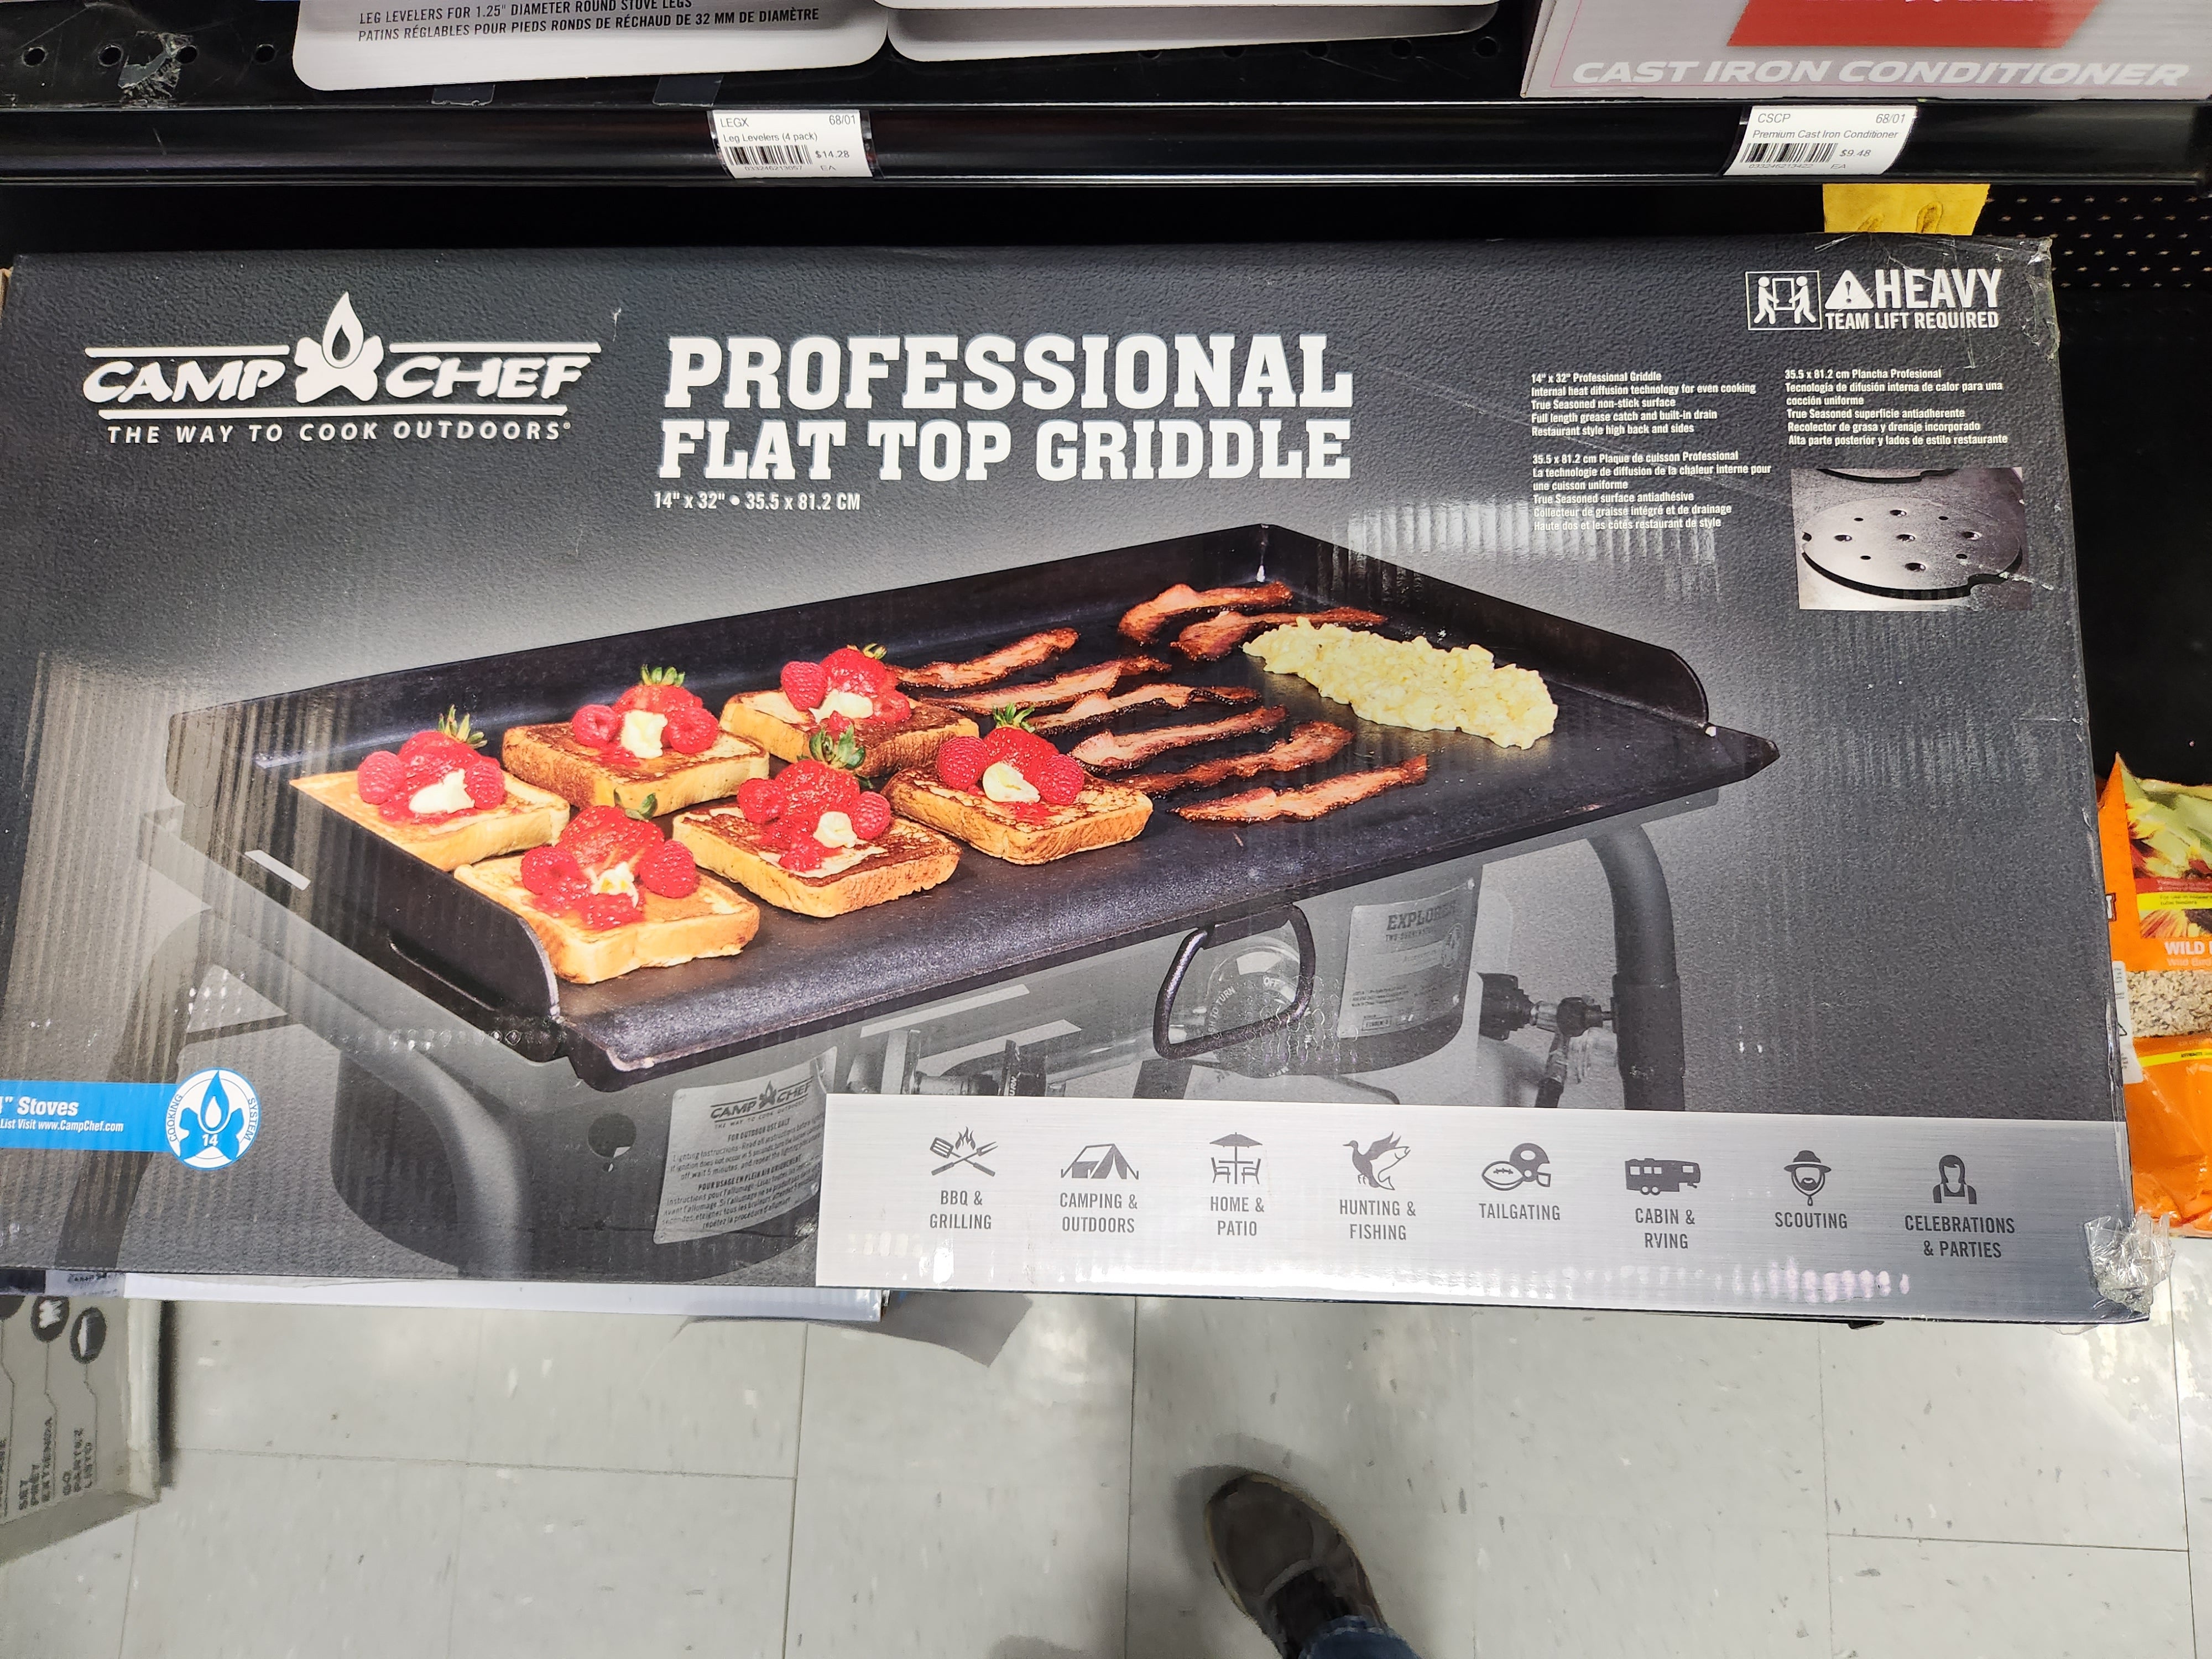 Camp Chef Professional Flat Top Griddle 14" x 32"